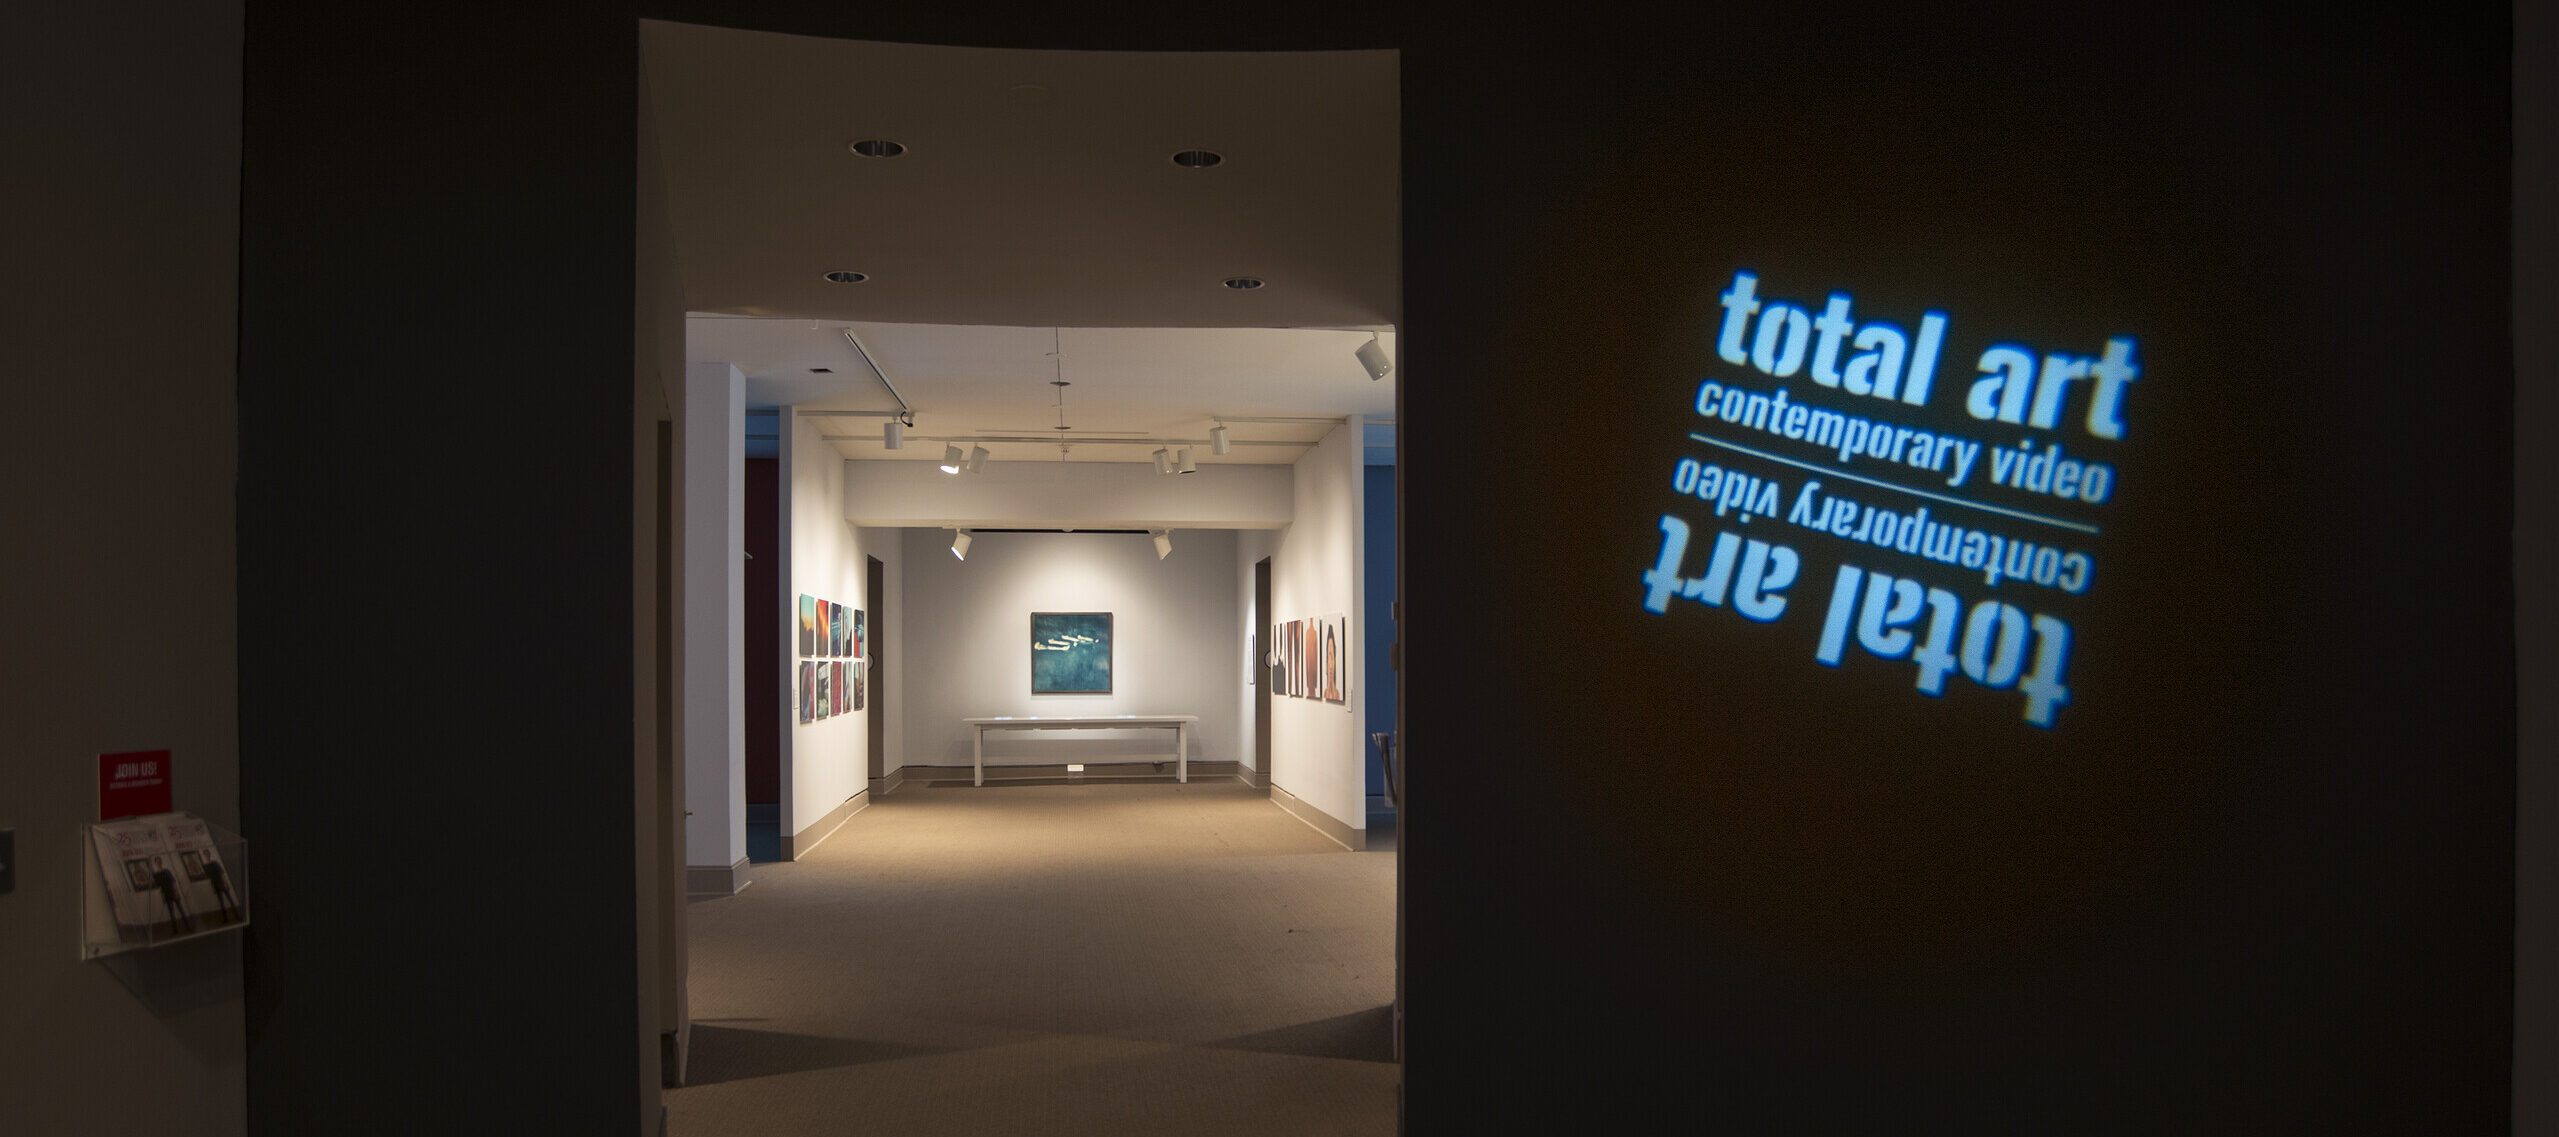 View of a gallery space. In a dark room, the title of the exhibition, 